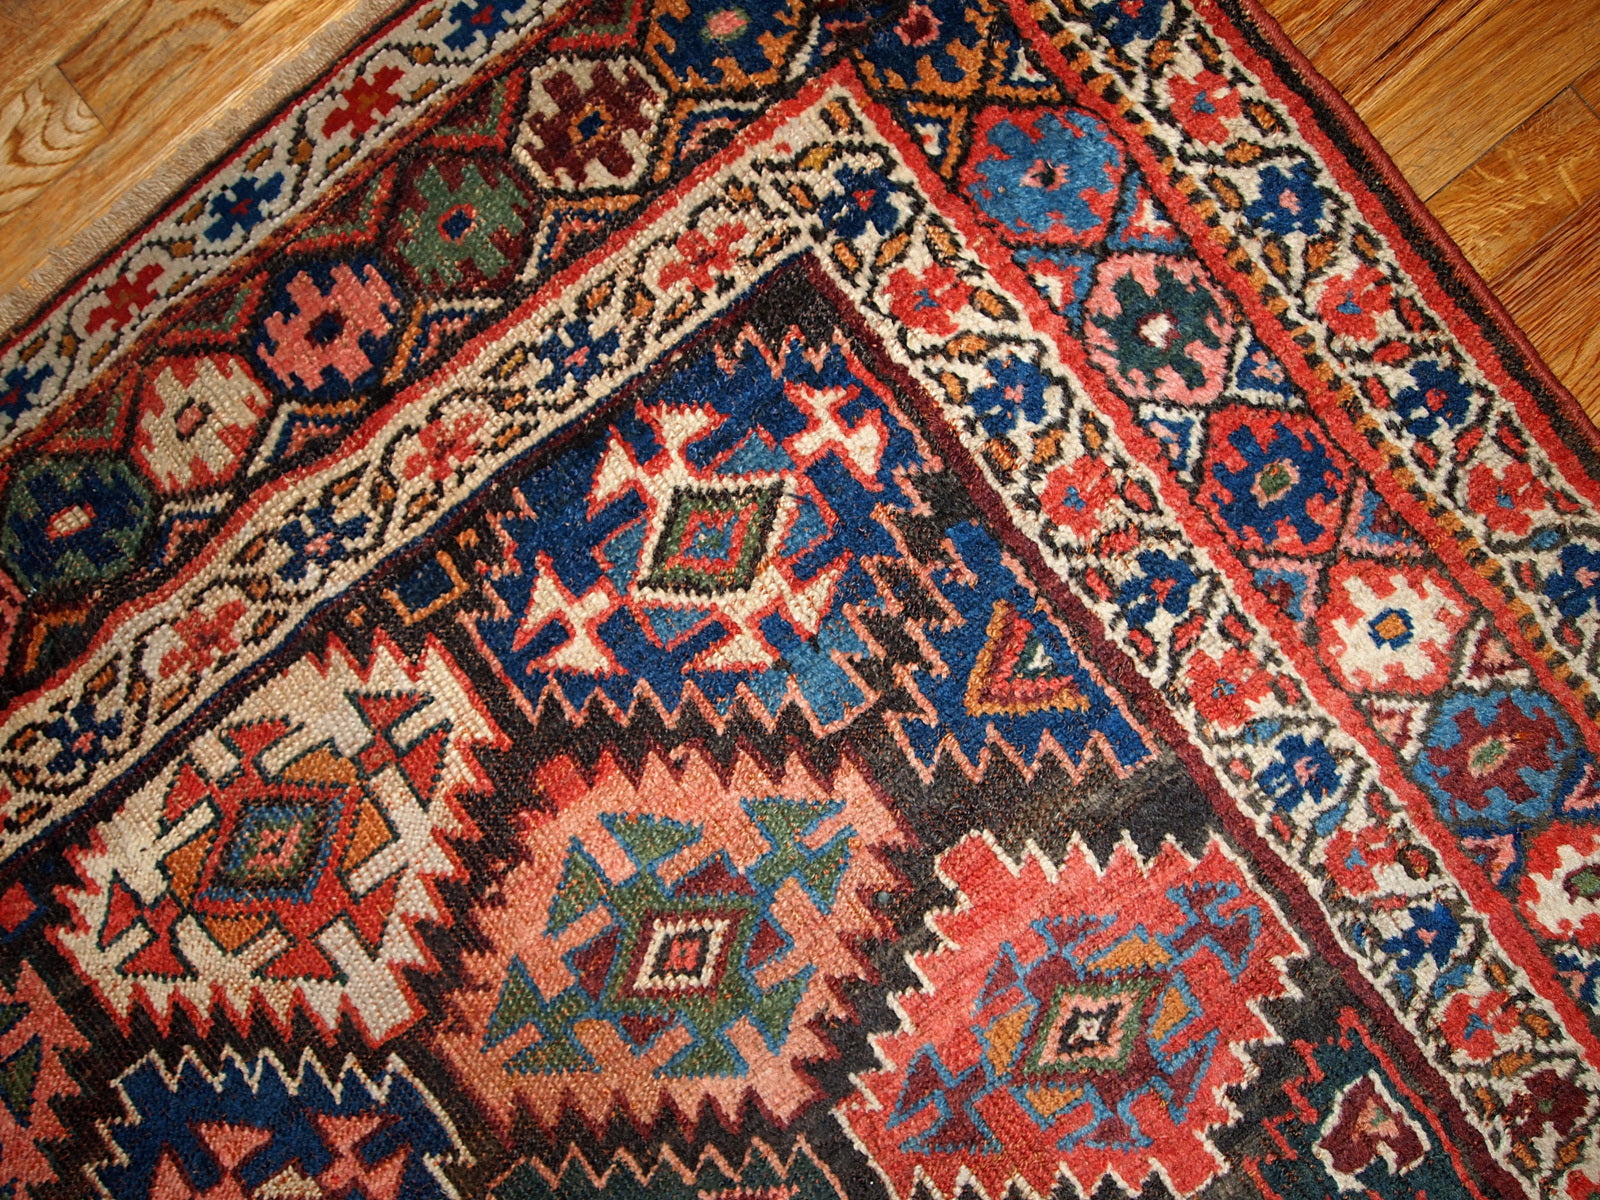 Antique Persian Kurdish rug in chocolate brown background color and repeating pattern. This rug has Jaff Kurdish design. It is in original good condition.